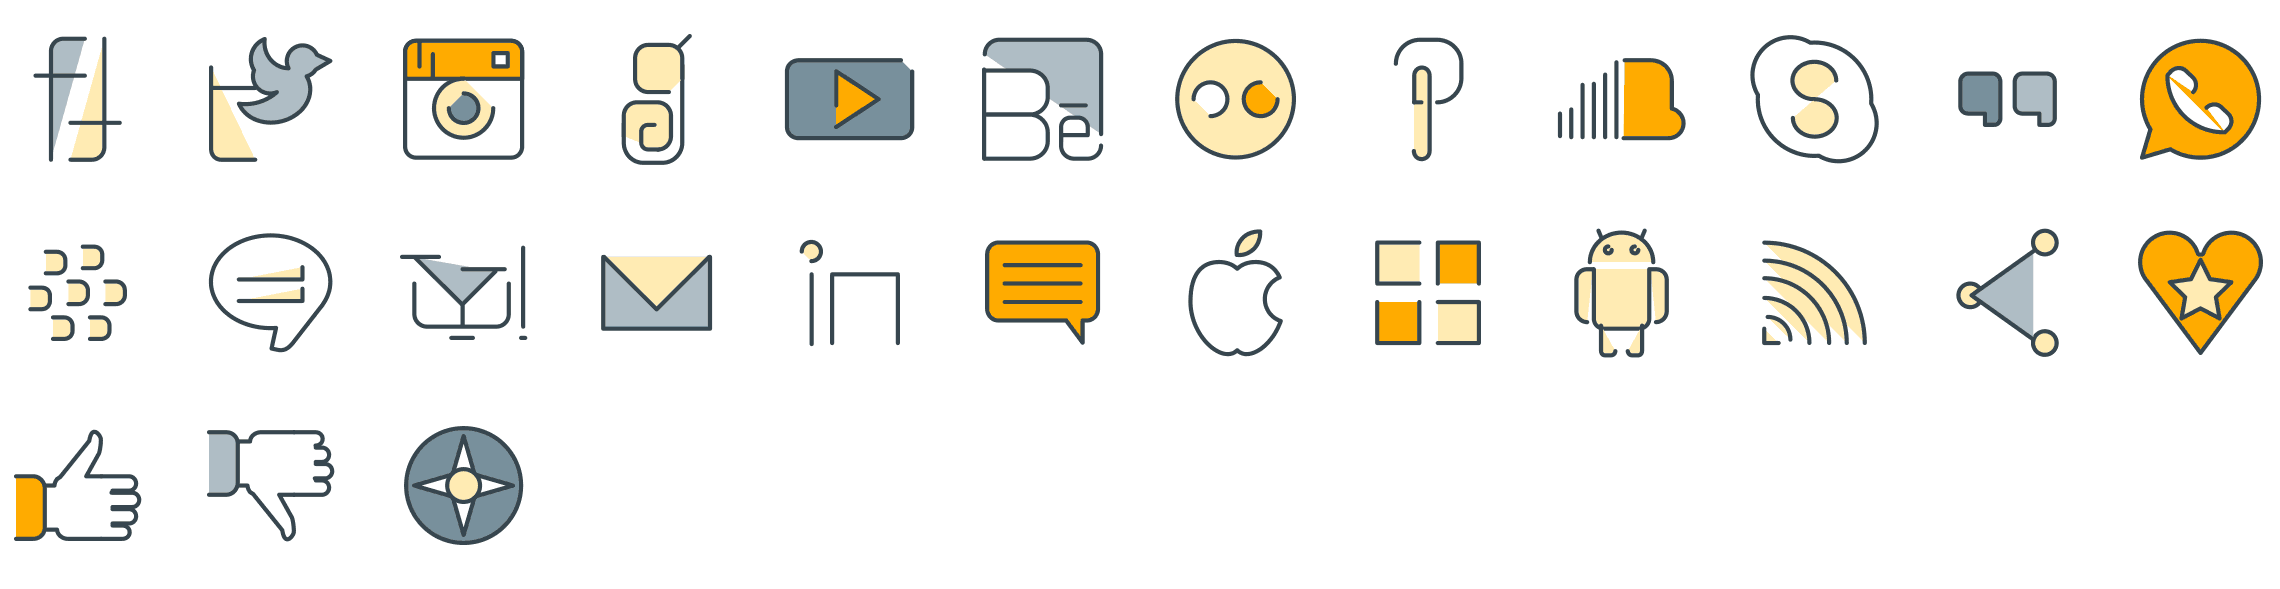 social-media-funline-icons-preview